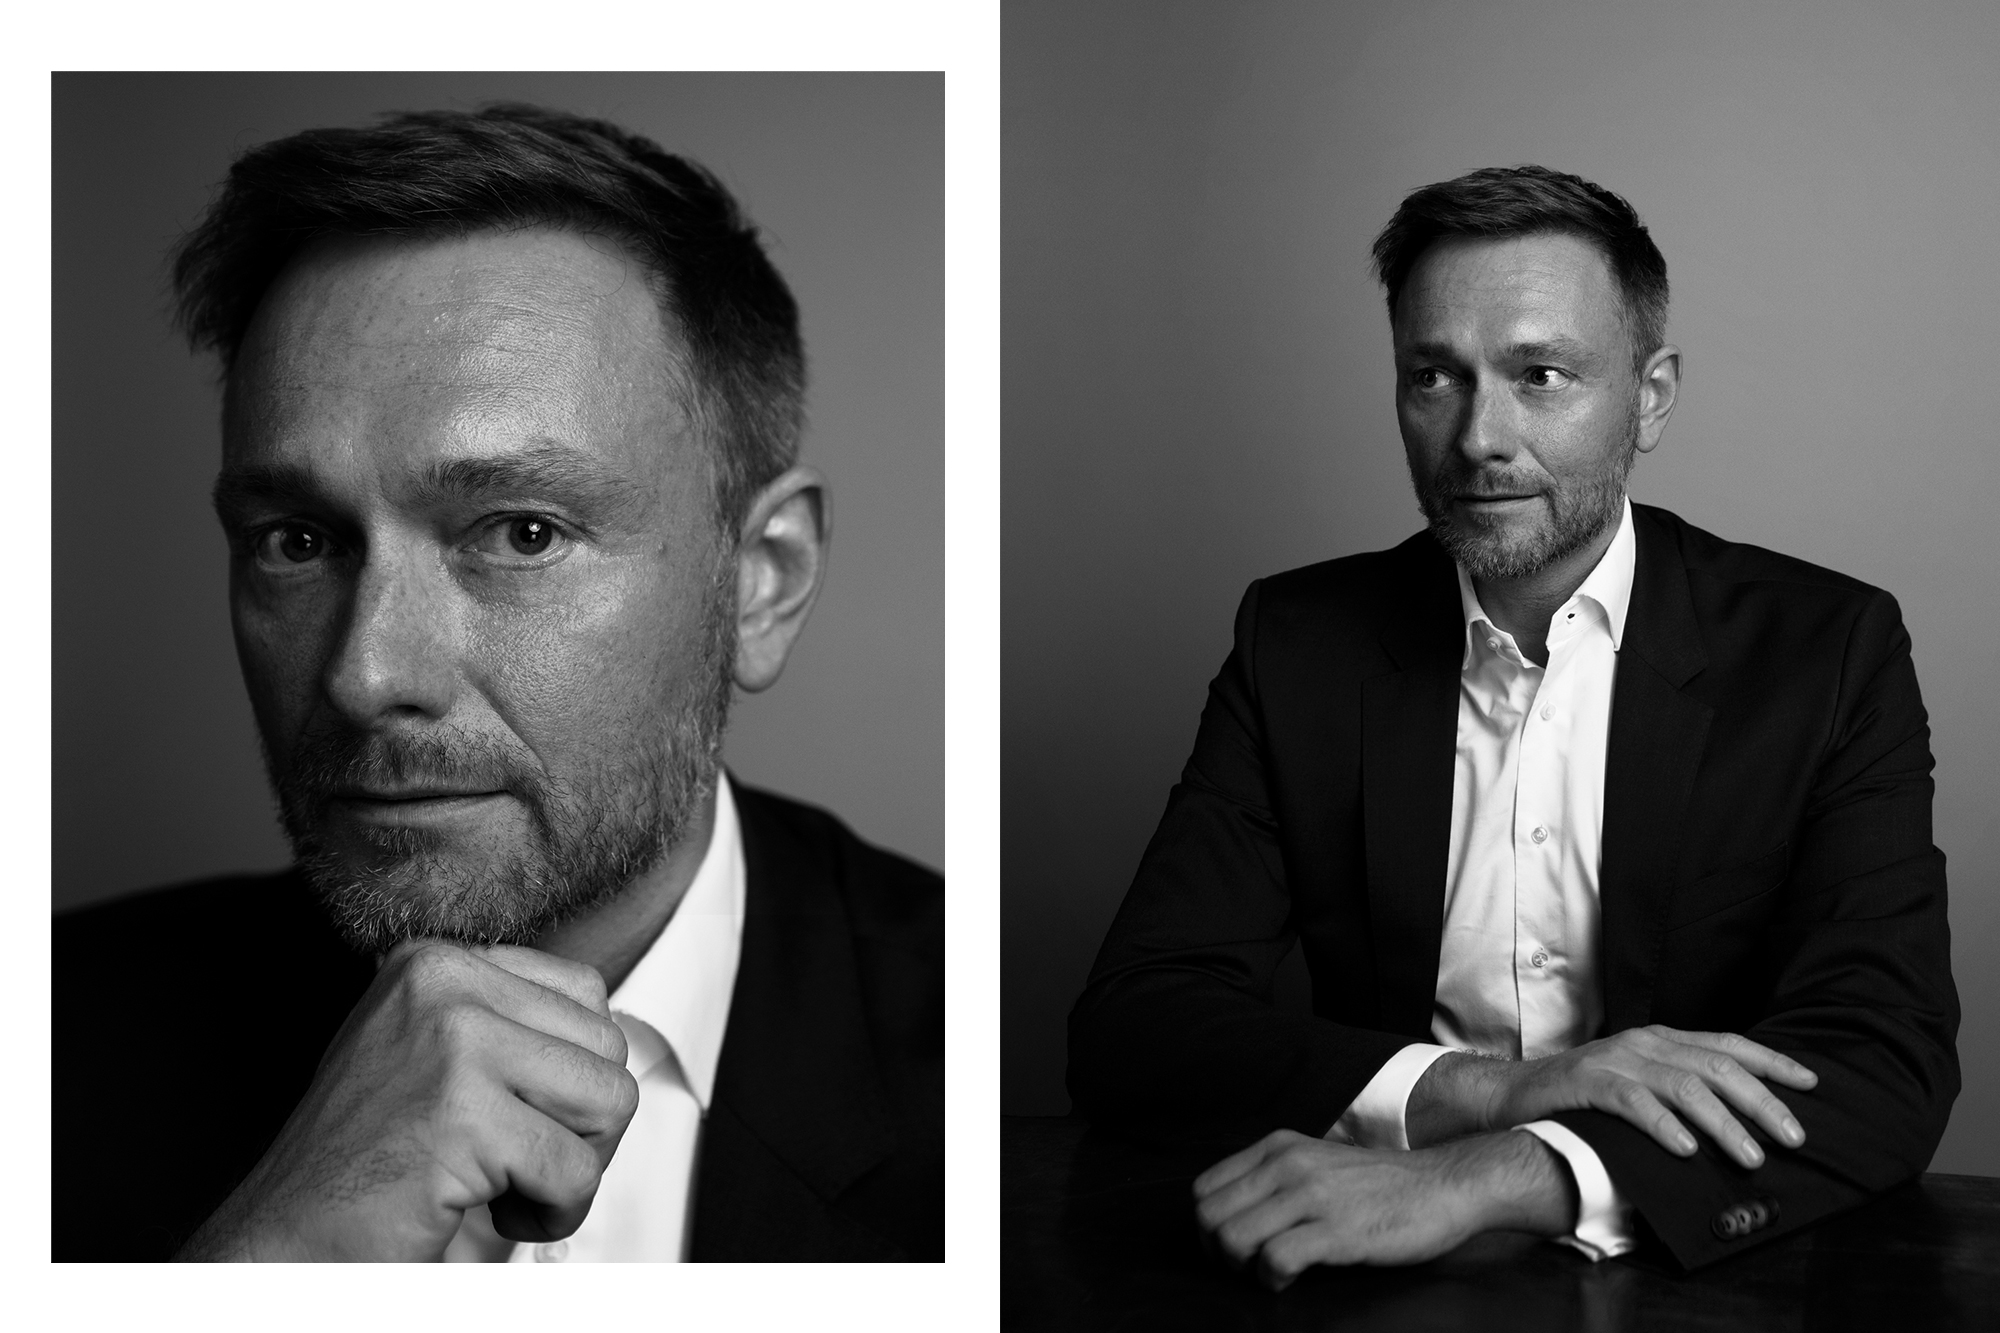 Christian Lindner, german politician, member of the Bundestag and leader of the liberal Free Democratic Party of Germany (FDP) photographed by Maximilian Baier